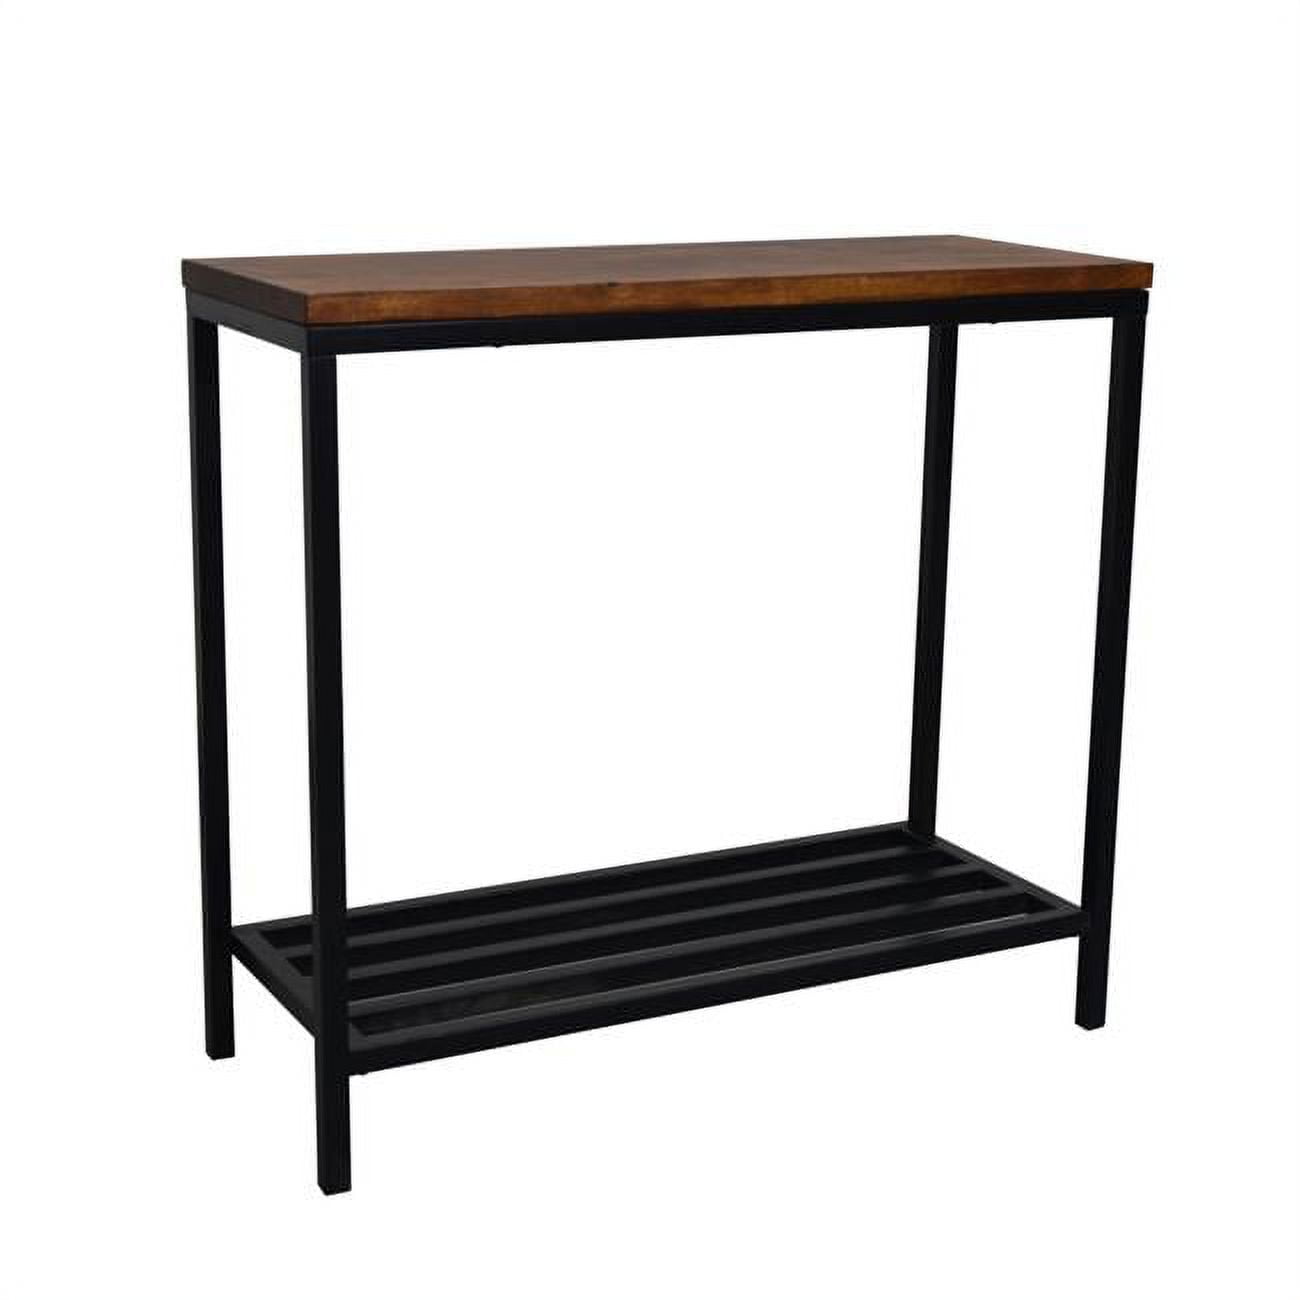 Guest Room Ryan Rich Metal Console Table - Chestnut & Black - 31 x 14 x 34 in.